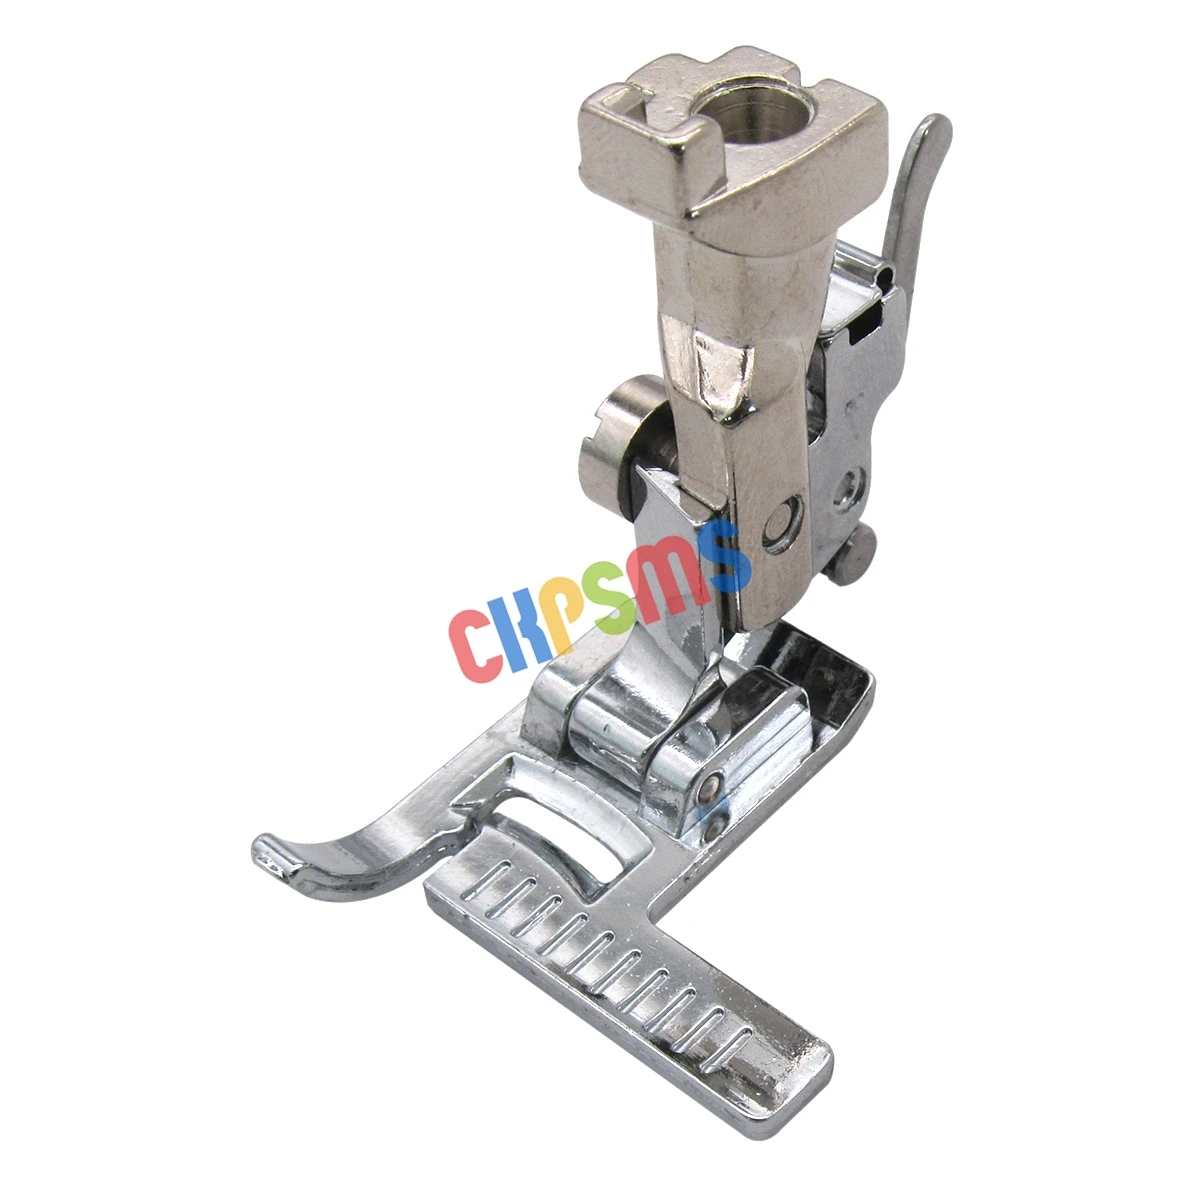 

1SET #CY-9913+CY-7300L+0083687000 Stitch Guide Presser Foot for BERNINA NEW STYLE Machines 130 153 180 185+